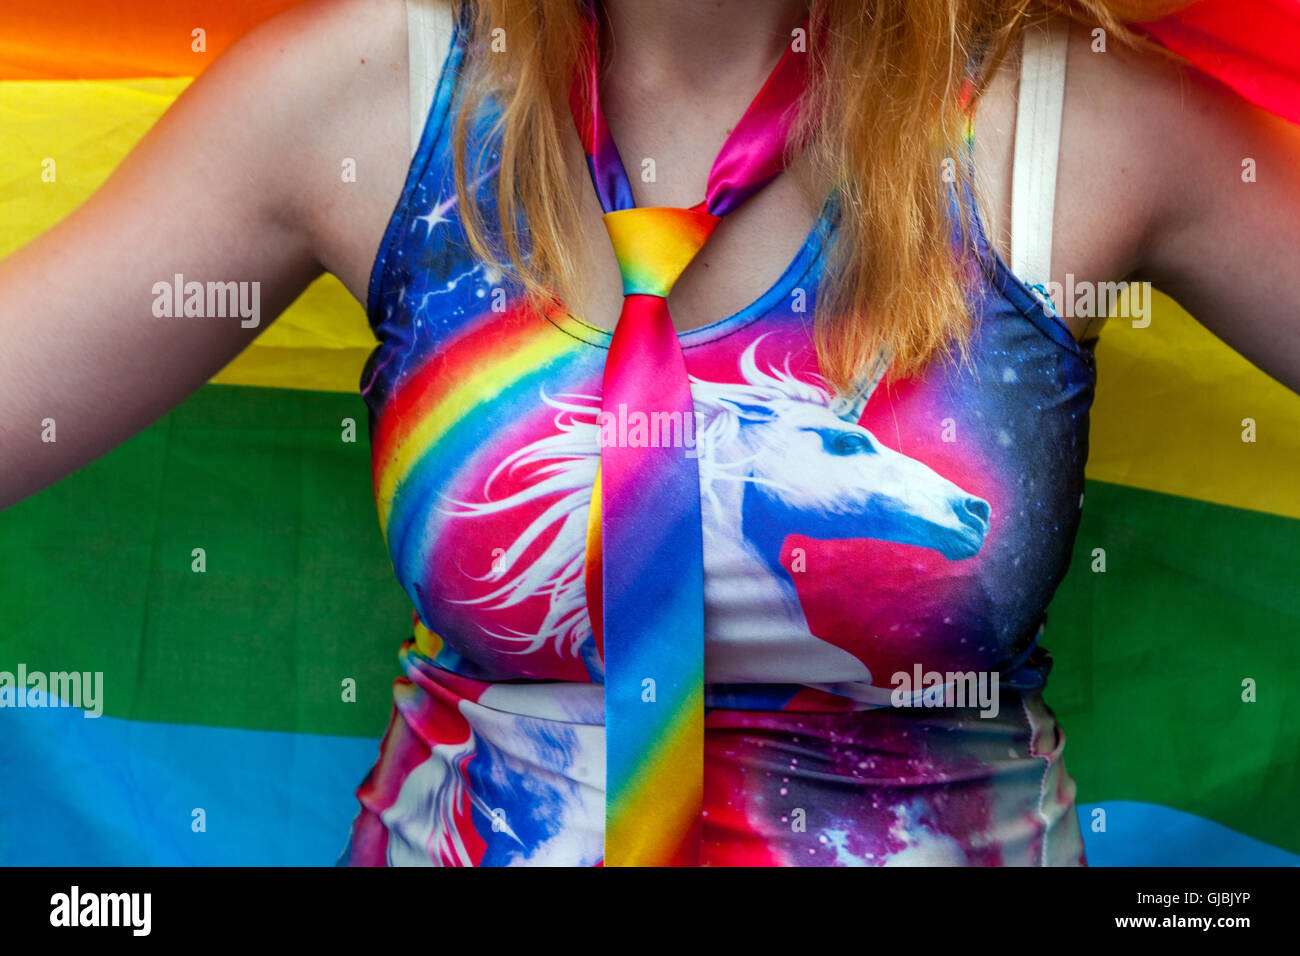 Woman Unicorn picture on her colorful dress, LGBT flag, Prague Pride, Czech Republic woman in summer dress Stock Photo